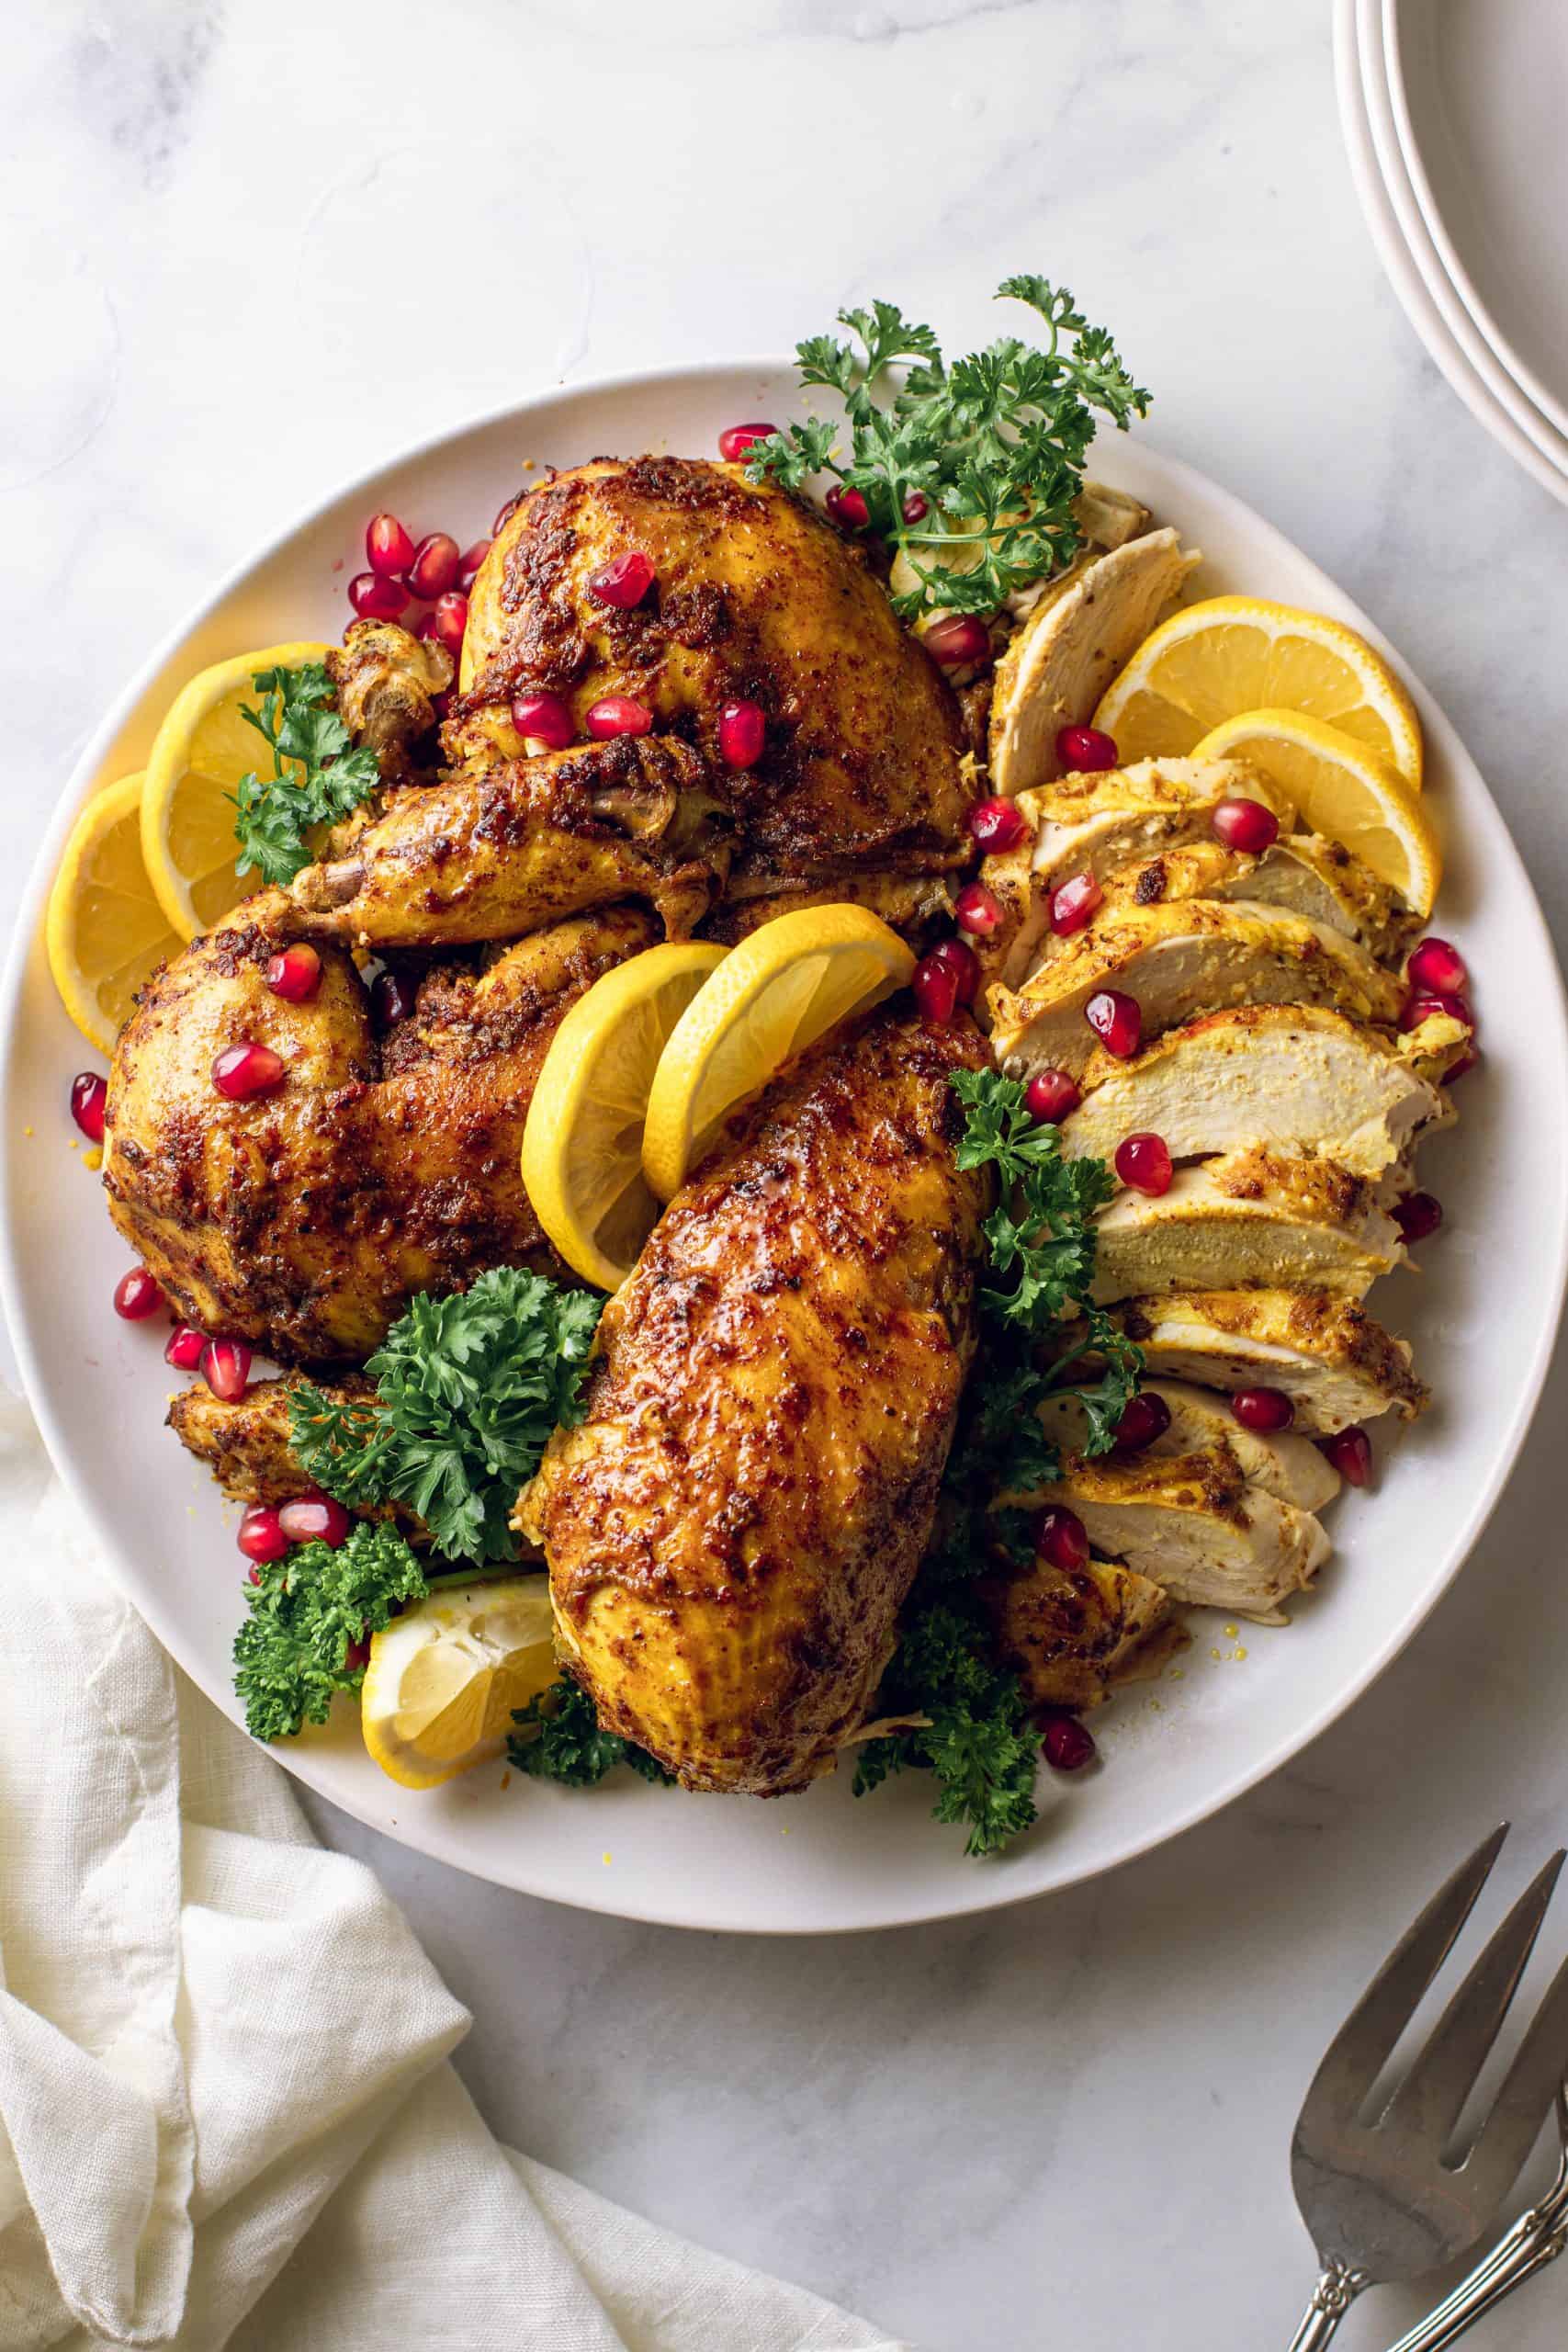 Whole Chicken cut into sections on a white plate with lemons and pomegranate seeds